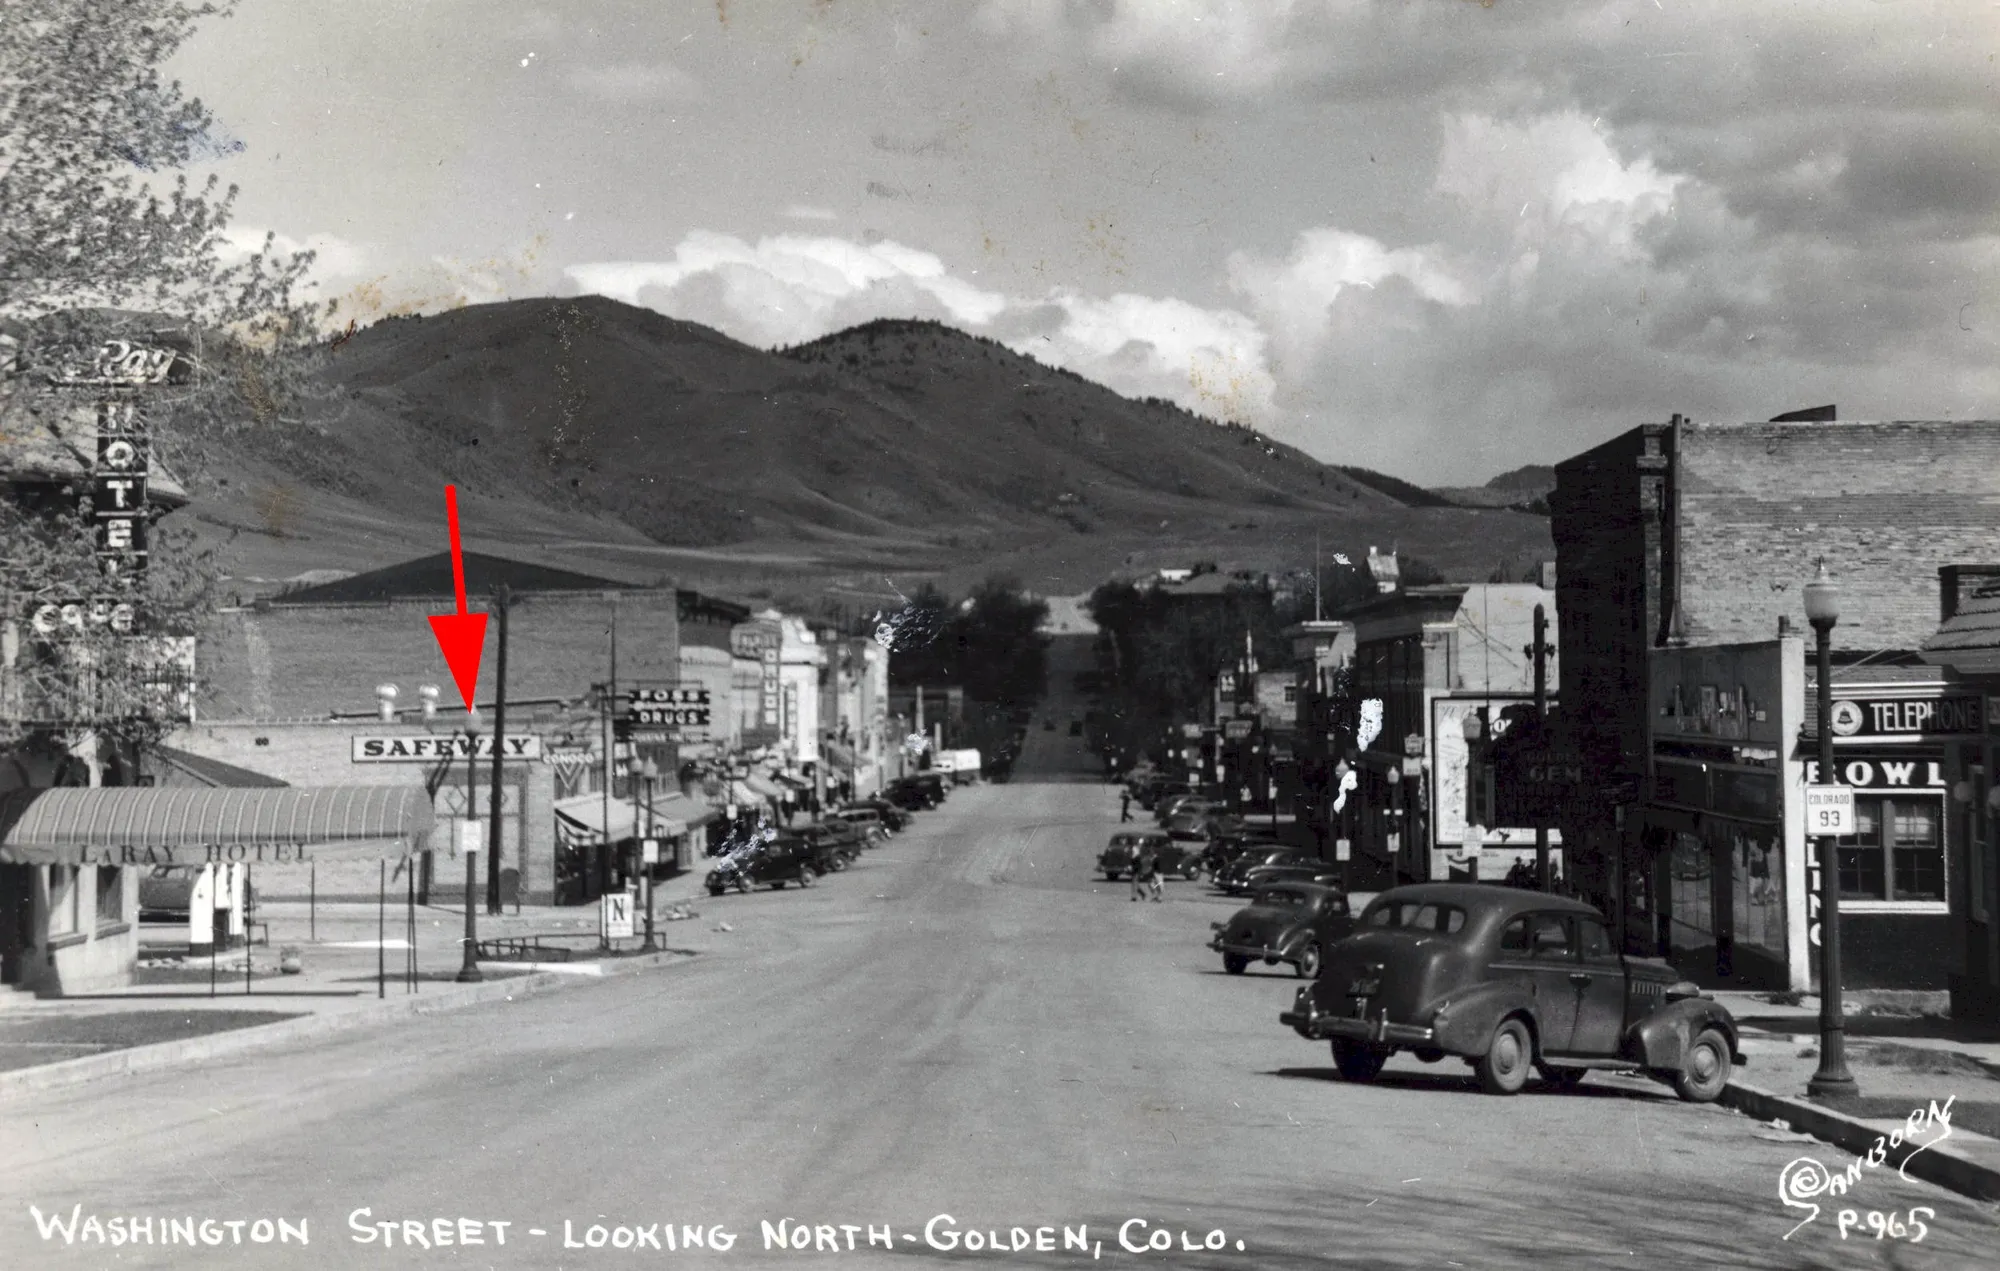 black and white postcard view of Washington Avenue, facing north, with a red arrow pointing to the Safeway store